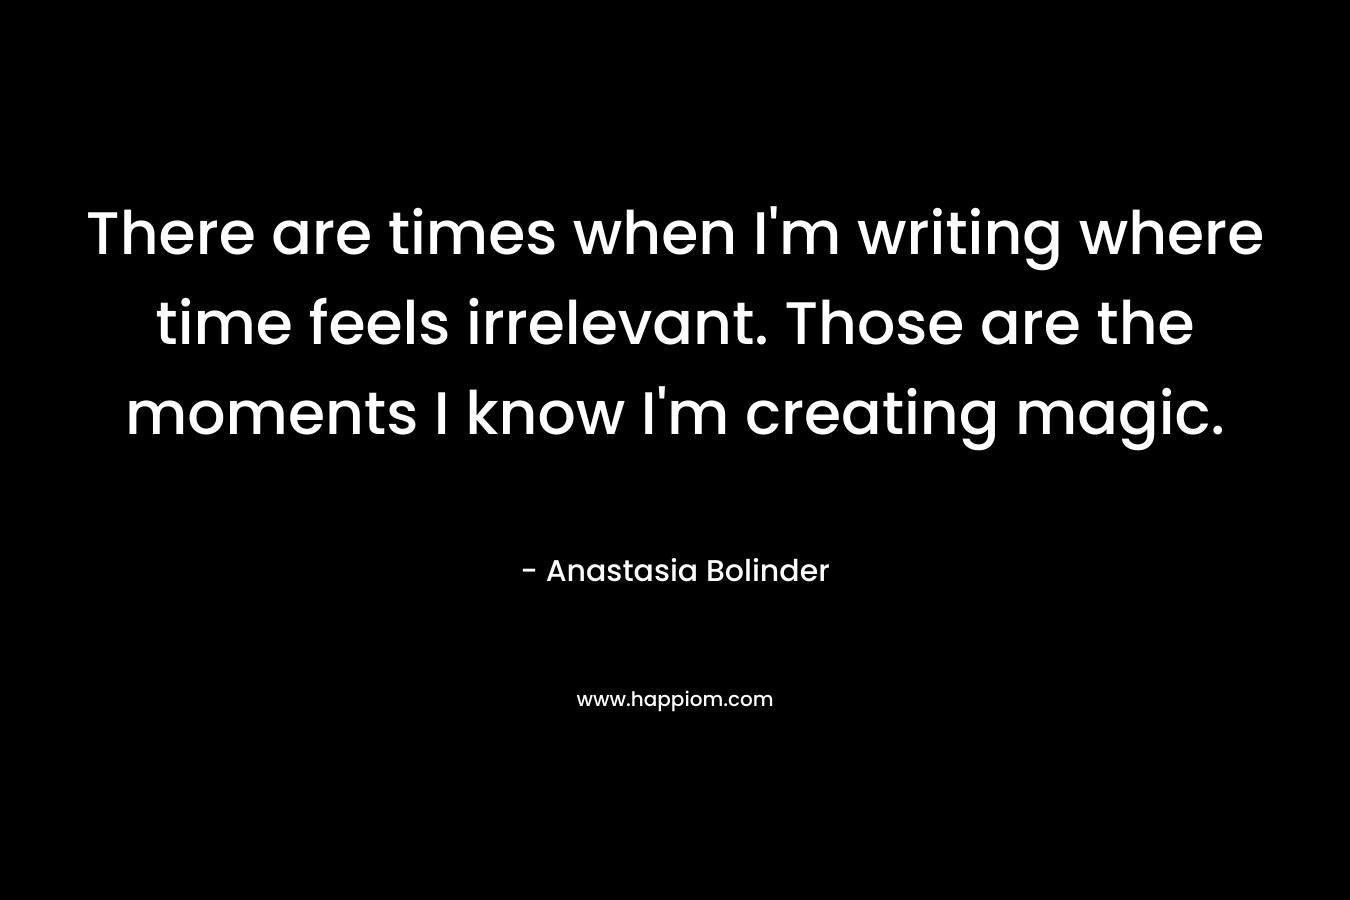 There are times when I’m writing where time feels irrelevant. Those are the moments I know I’m creating magic. – Anastasia Bolinder